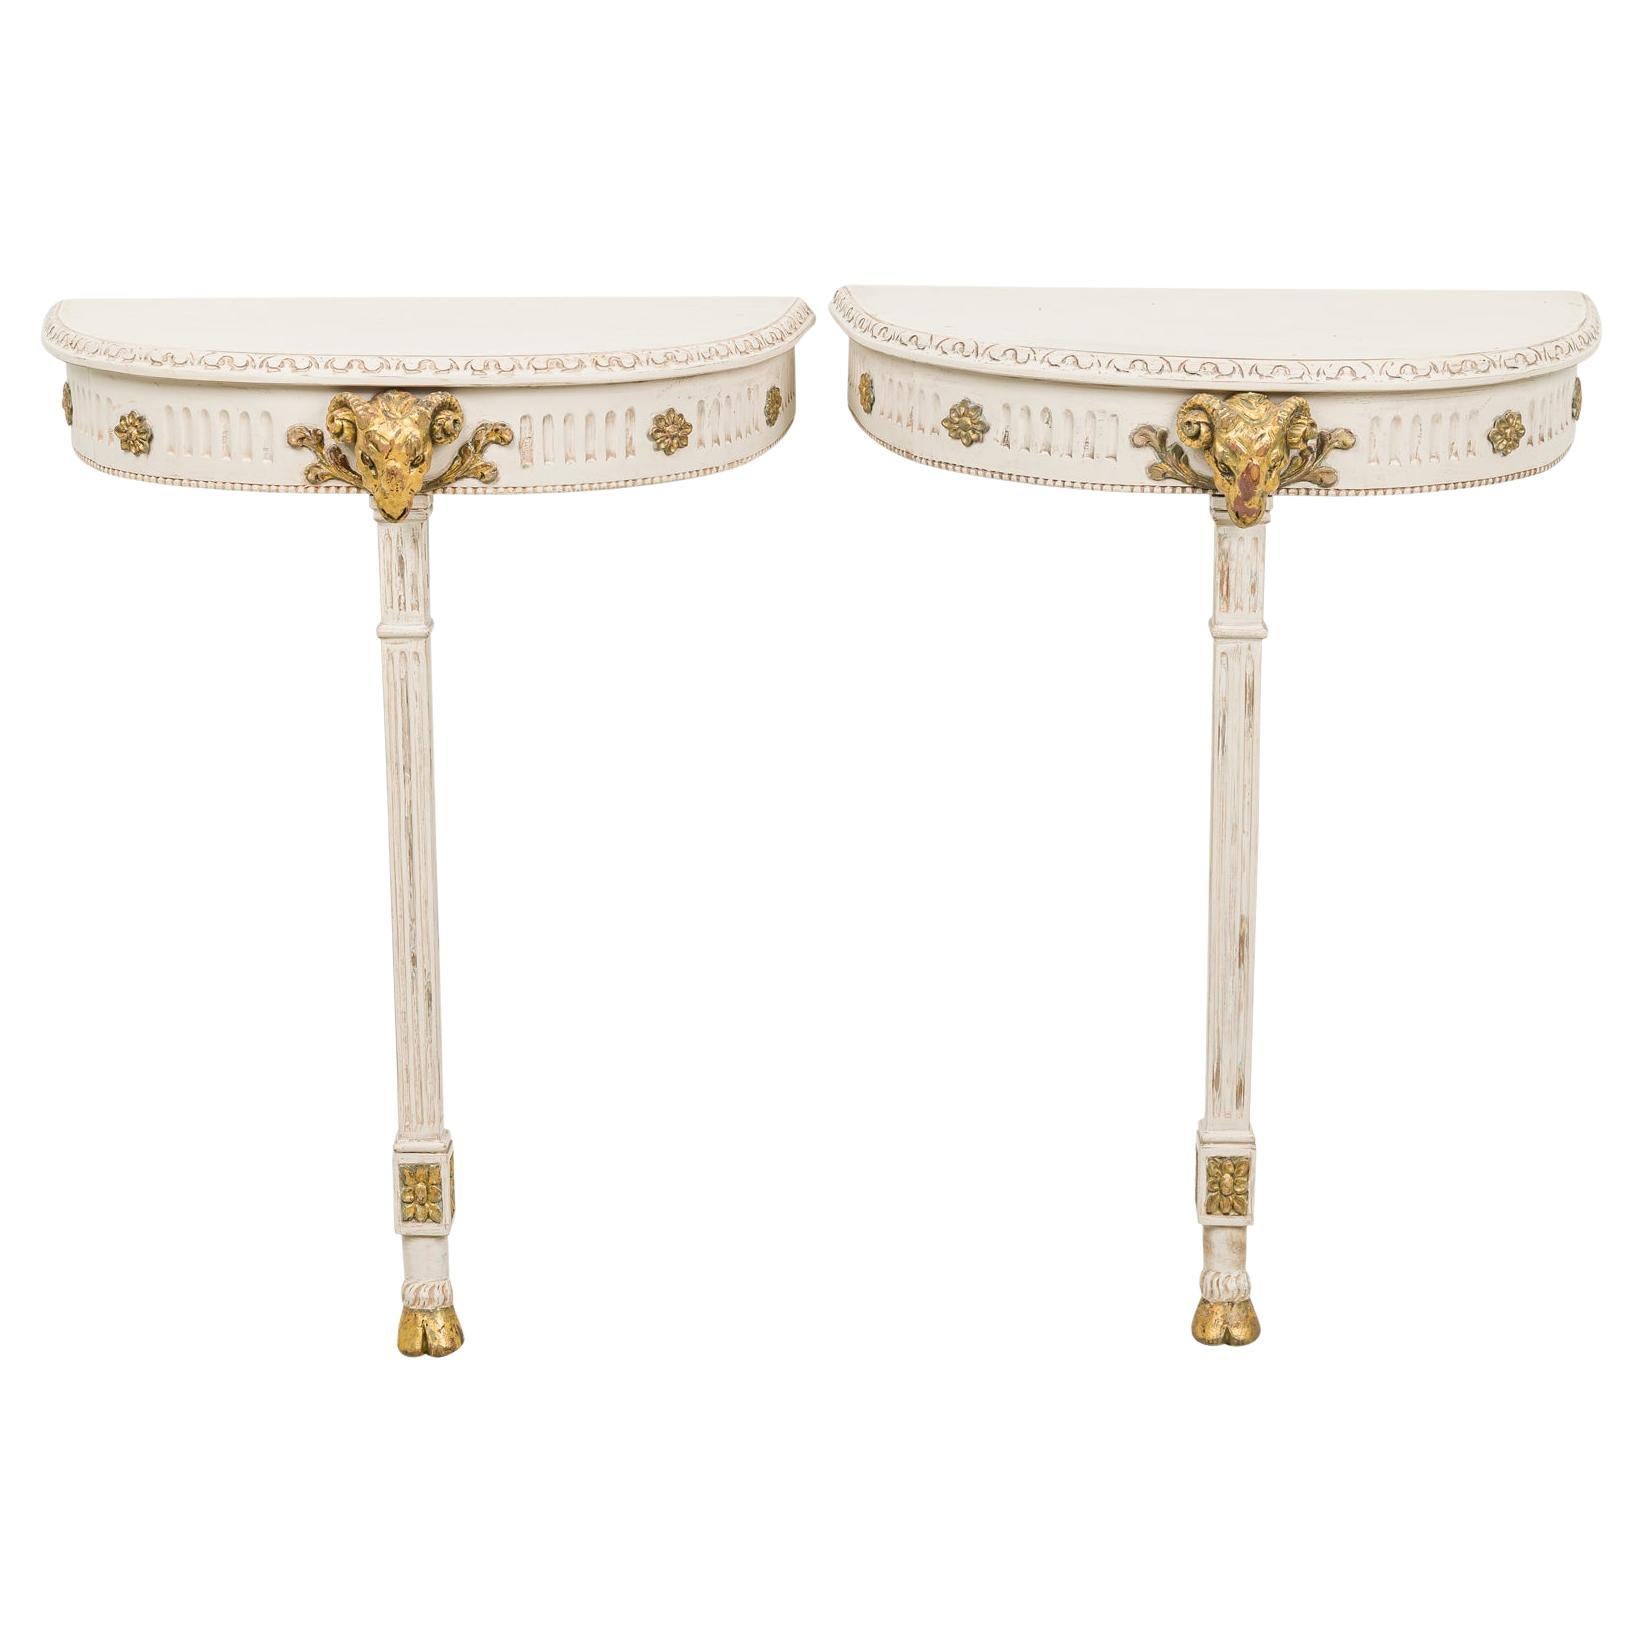 Pair of Swedish Neo-Classic Cream Painted and Gilt Demilune Wall-Mounted Console